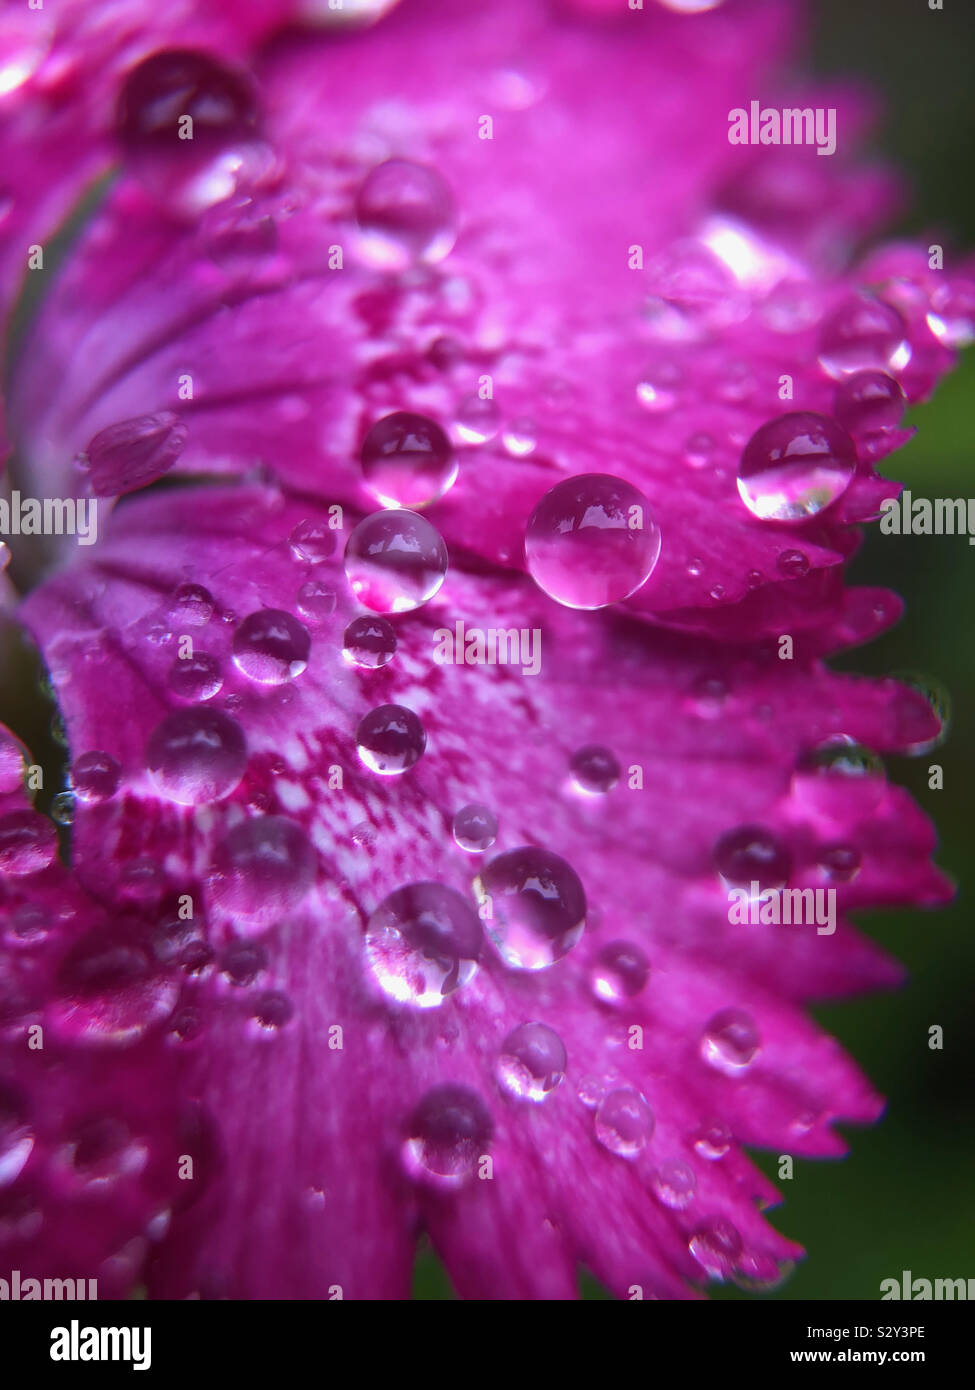 Up close of water droplets on purple flower Stock Photo